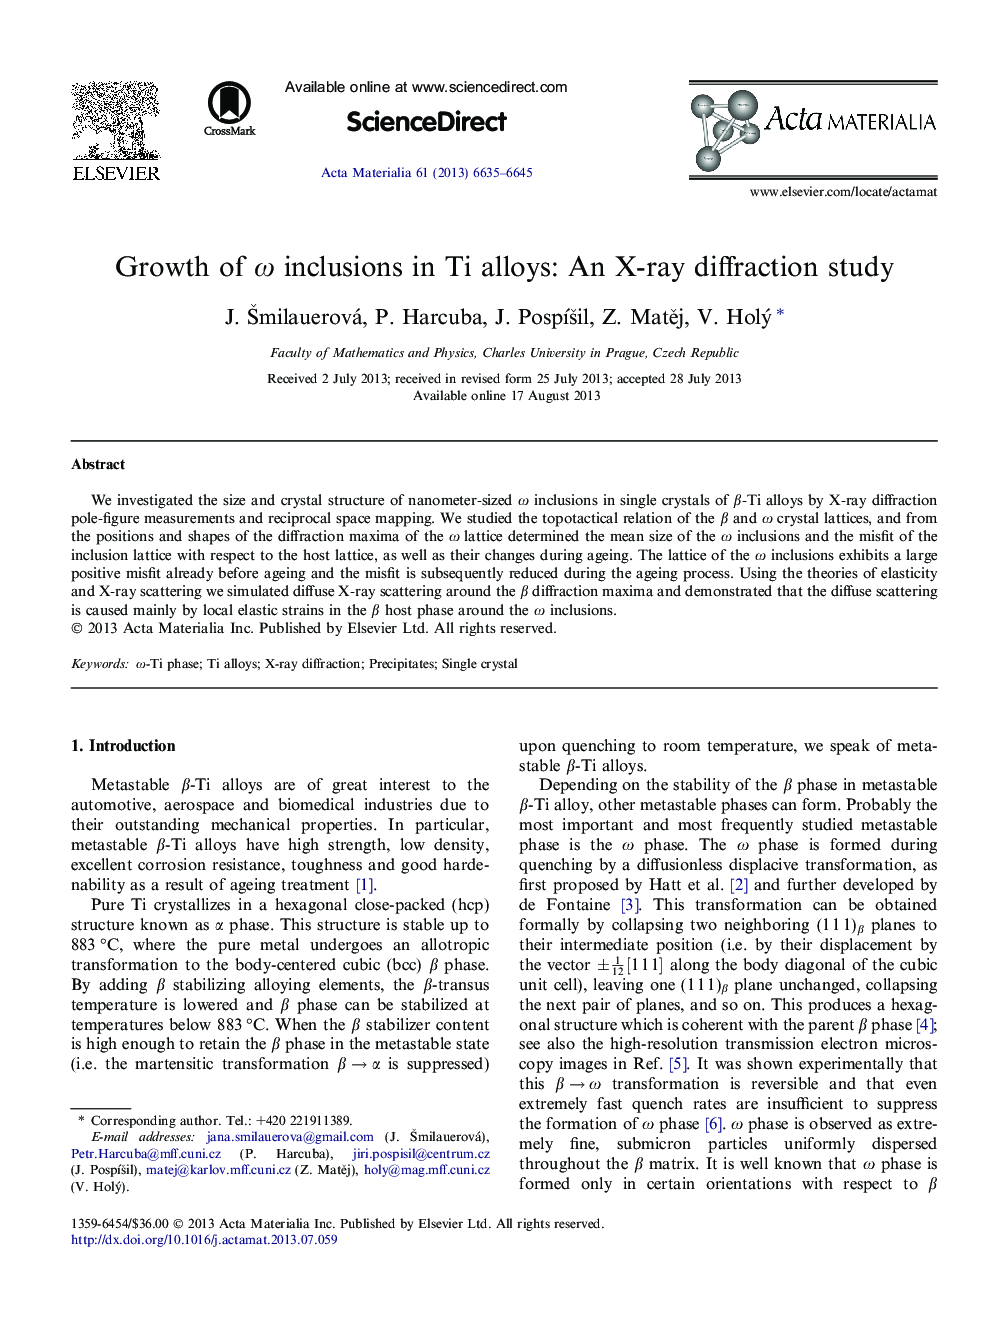 Growth of ω inclusions in Ti alloys: An X-ray diffraction study